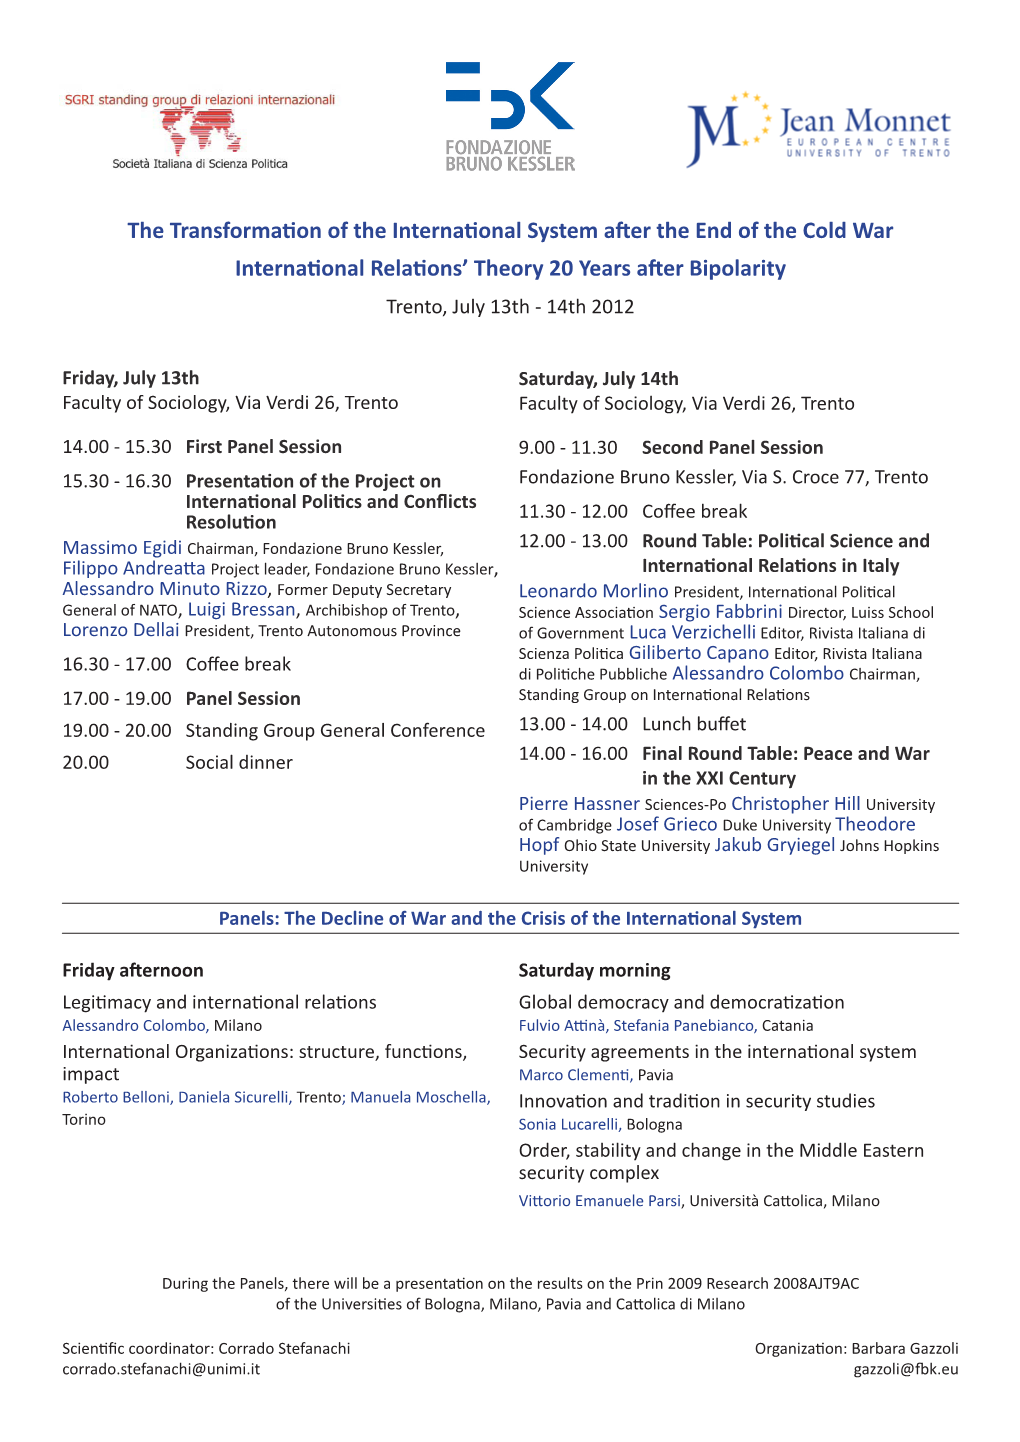 The Transformation of the International System After the End of the Cold War International Relations’ Theory 20 Years After Bipolarity Trento, July 13Th - 14Th 2012